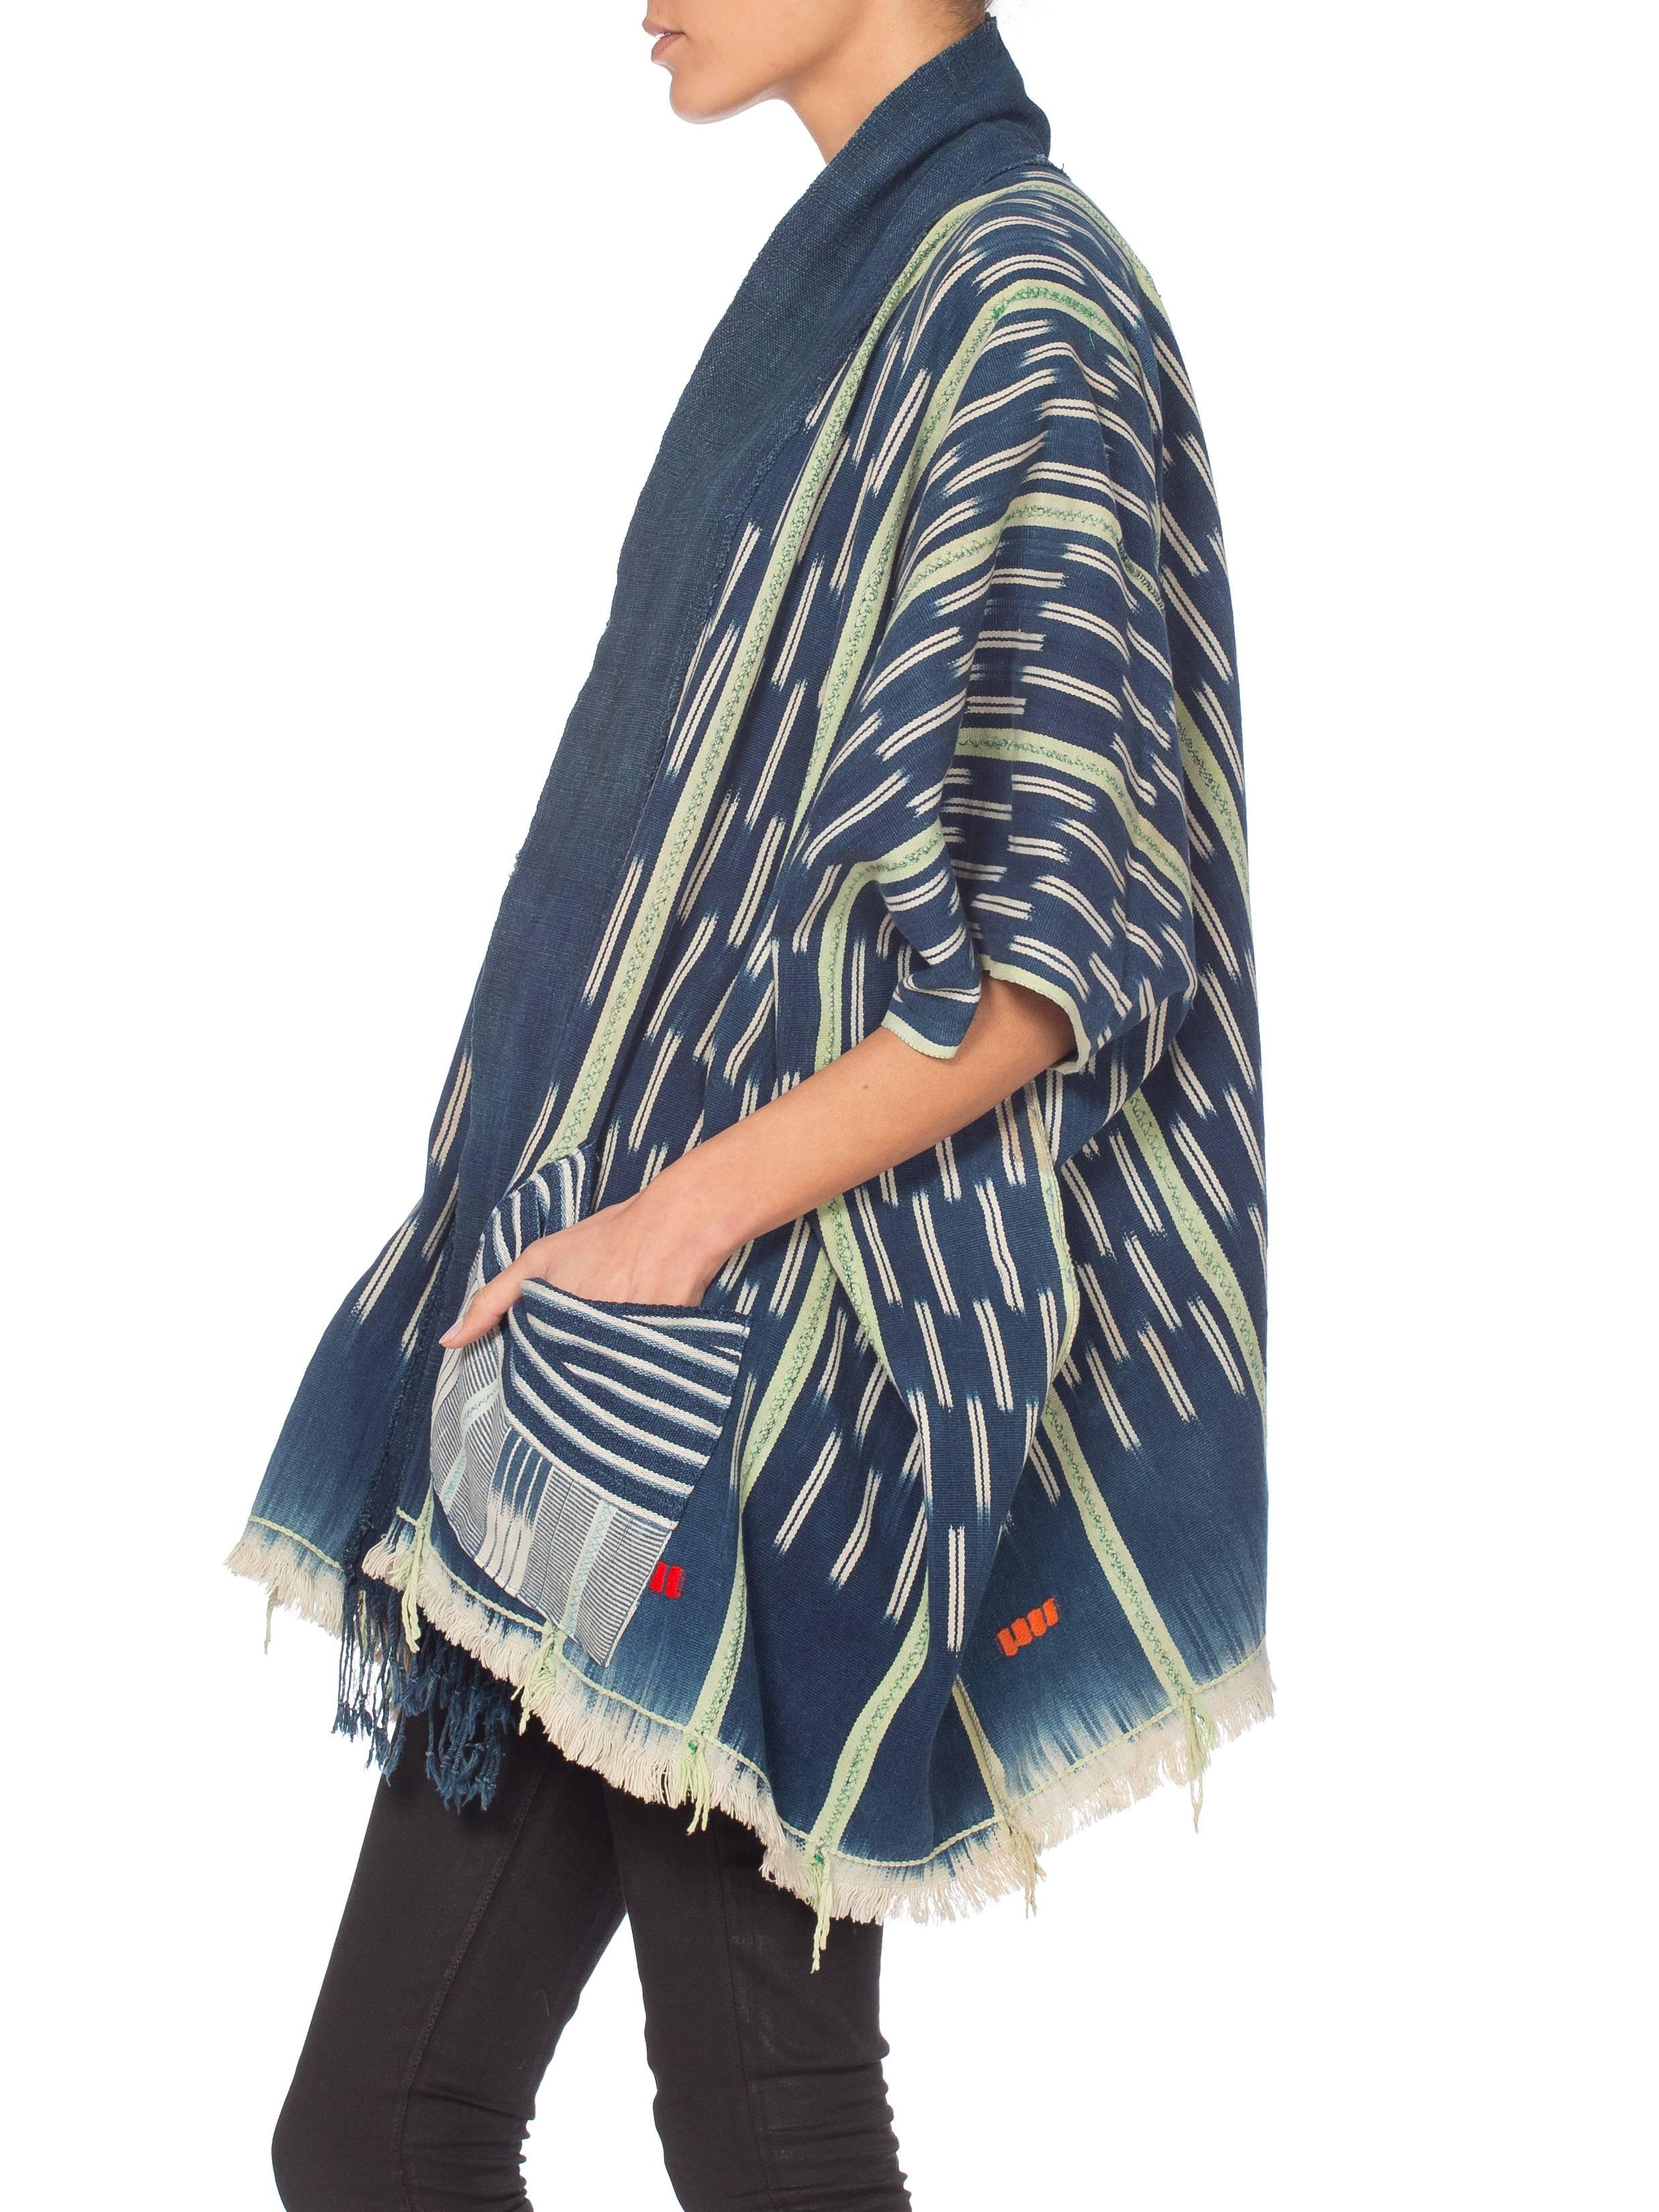 MORPHEW COLLECTION Indigo Blue & Green Cotton Handwoven African Oversized Ponch 5